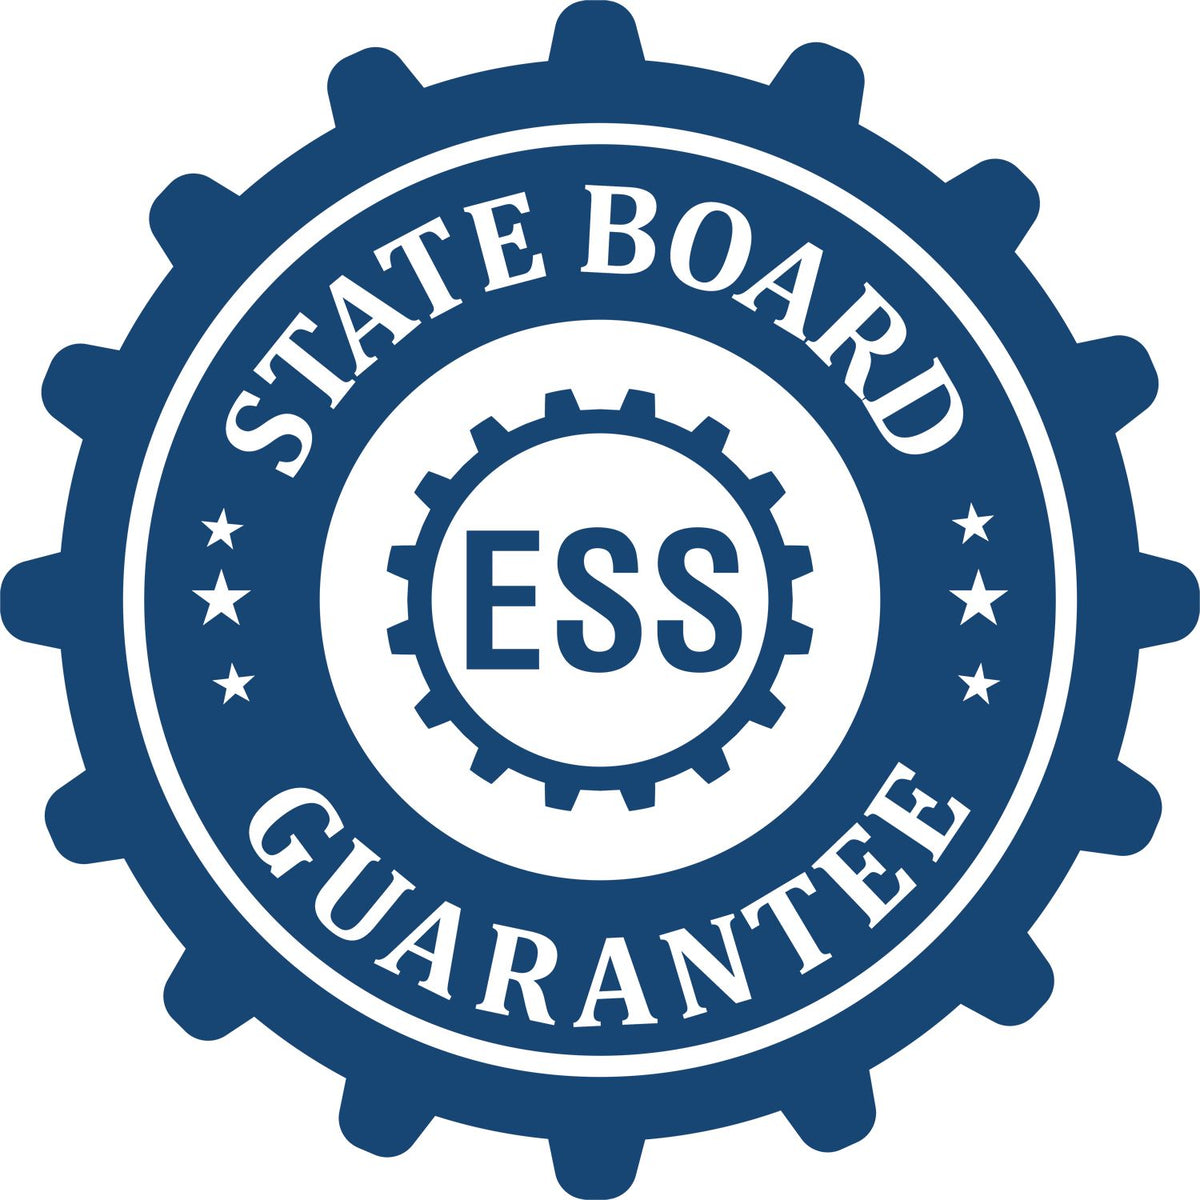 An emblem in a gear shape illustrating a state board guarantee for the State of Ohio Extended Long Reach Geologist Seal